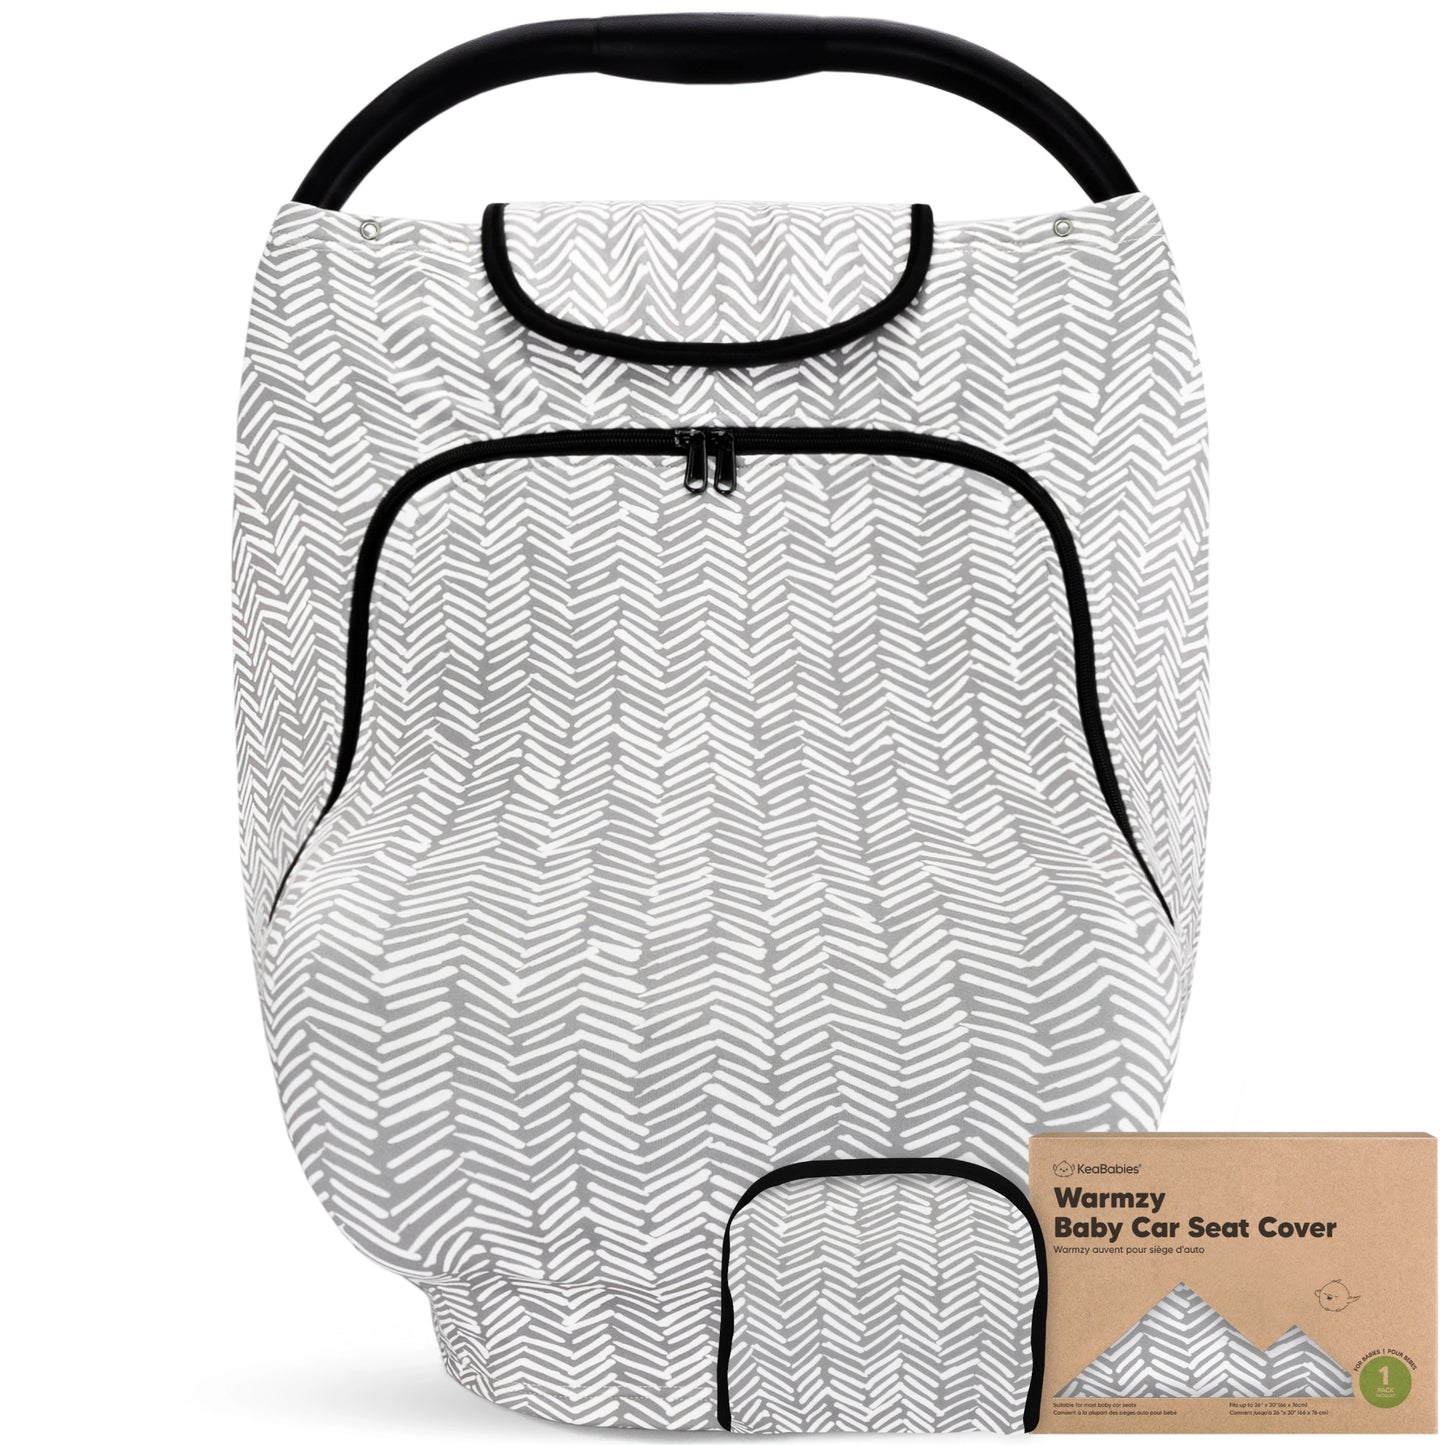 Warmzy Carseat Cover